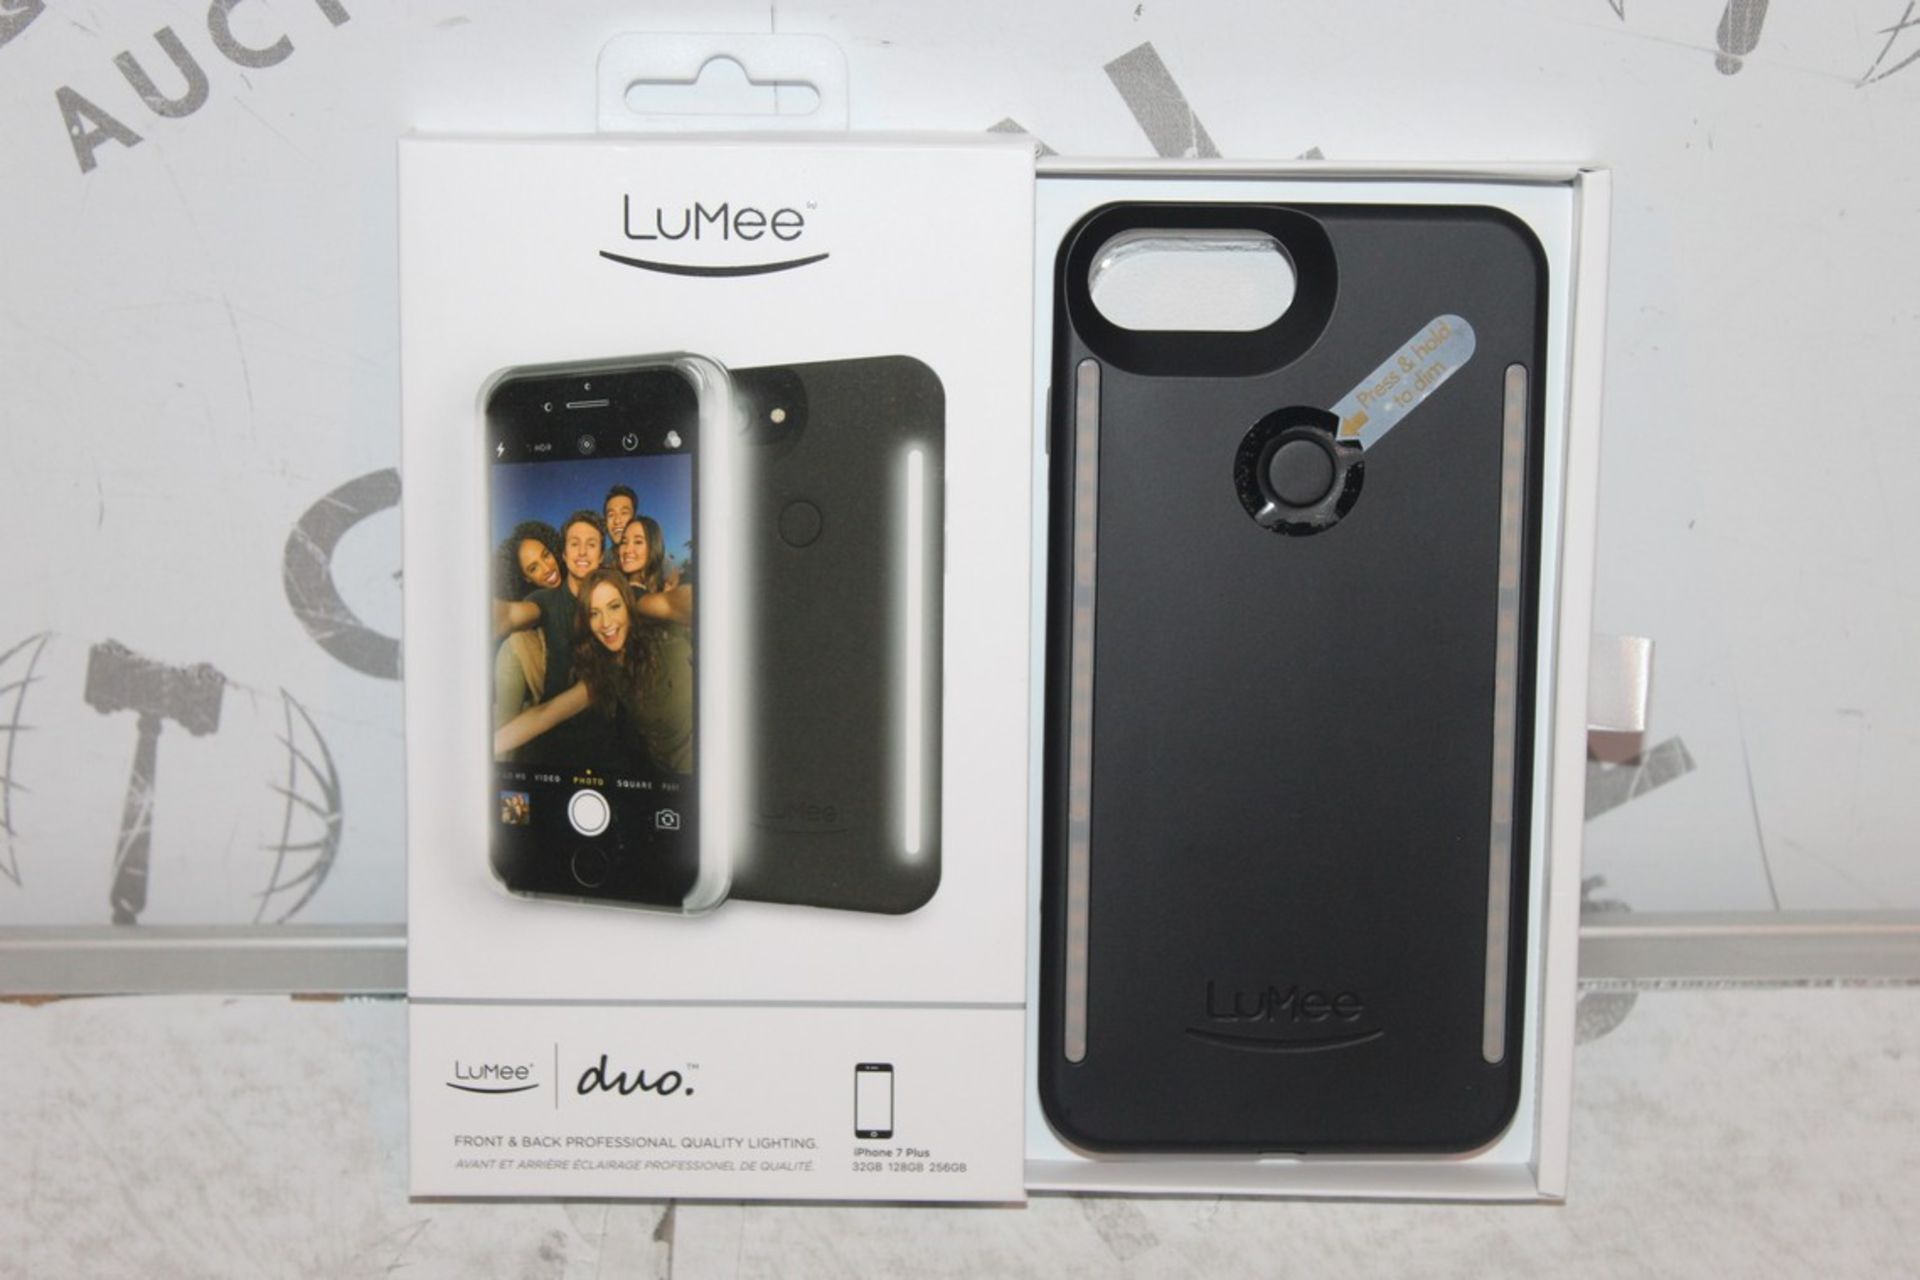 Lot to Contain 2 Brand New Iphone 7 Lumee Phone Cases with Perfect Lighting Solution For The Perfect